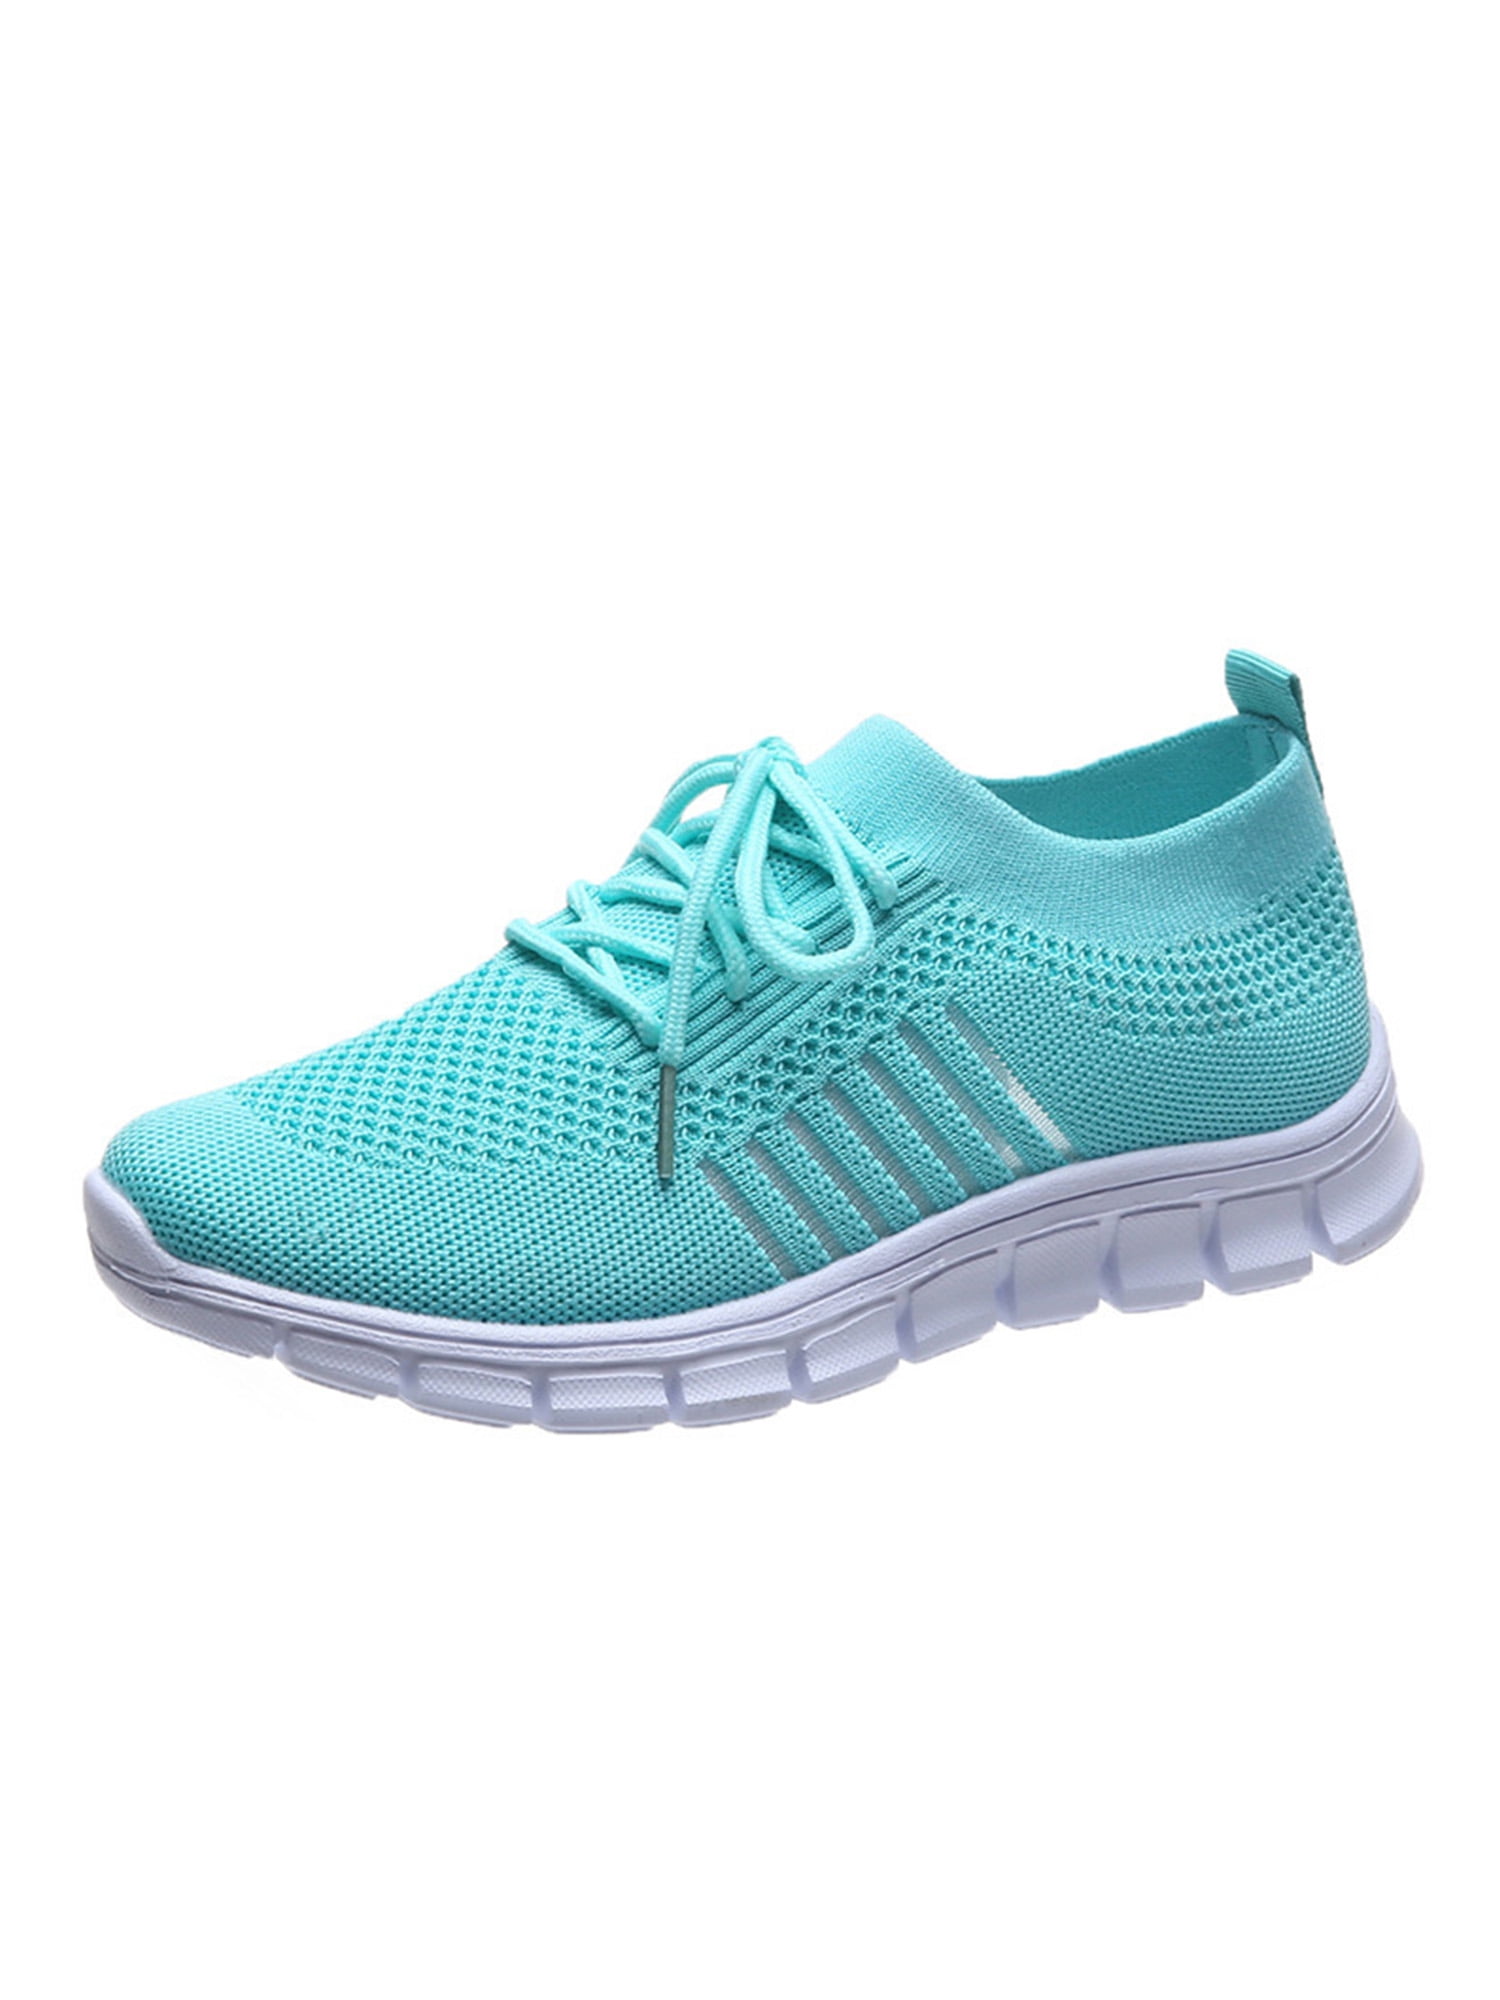 Women's Casual Breathable Crystal Bling Lace Up Sport Shoes